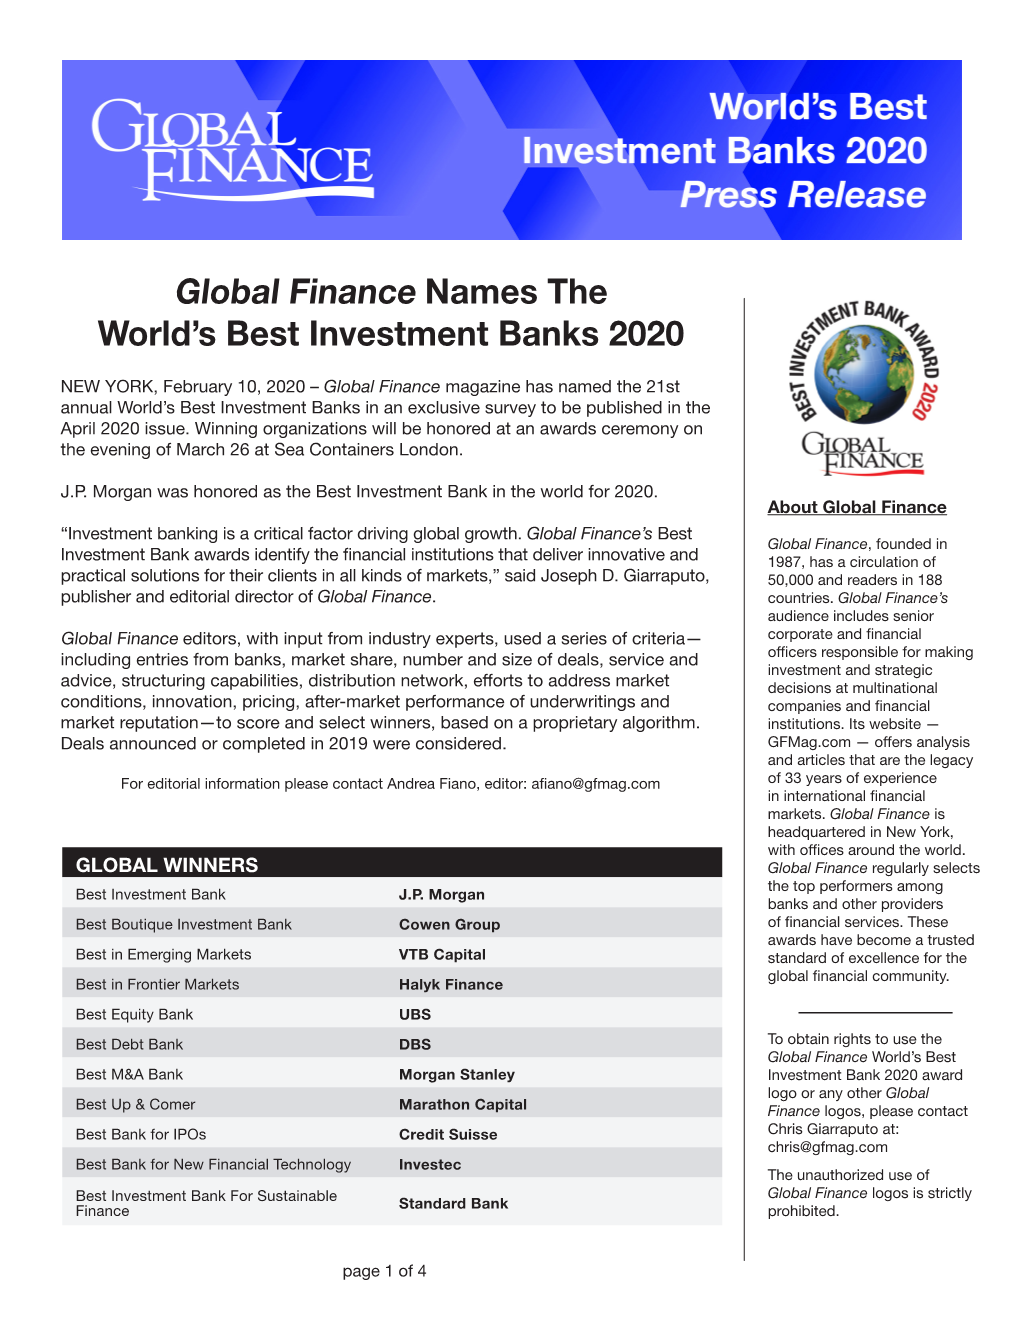 Best Investment Bank 2020